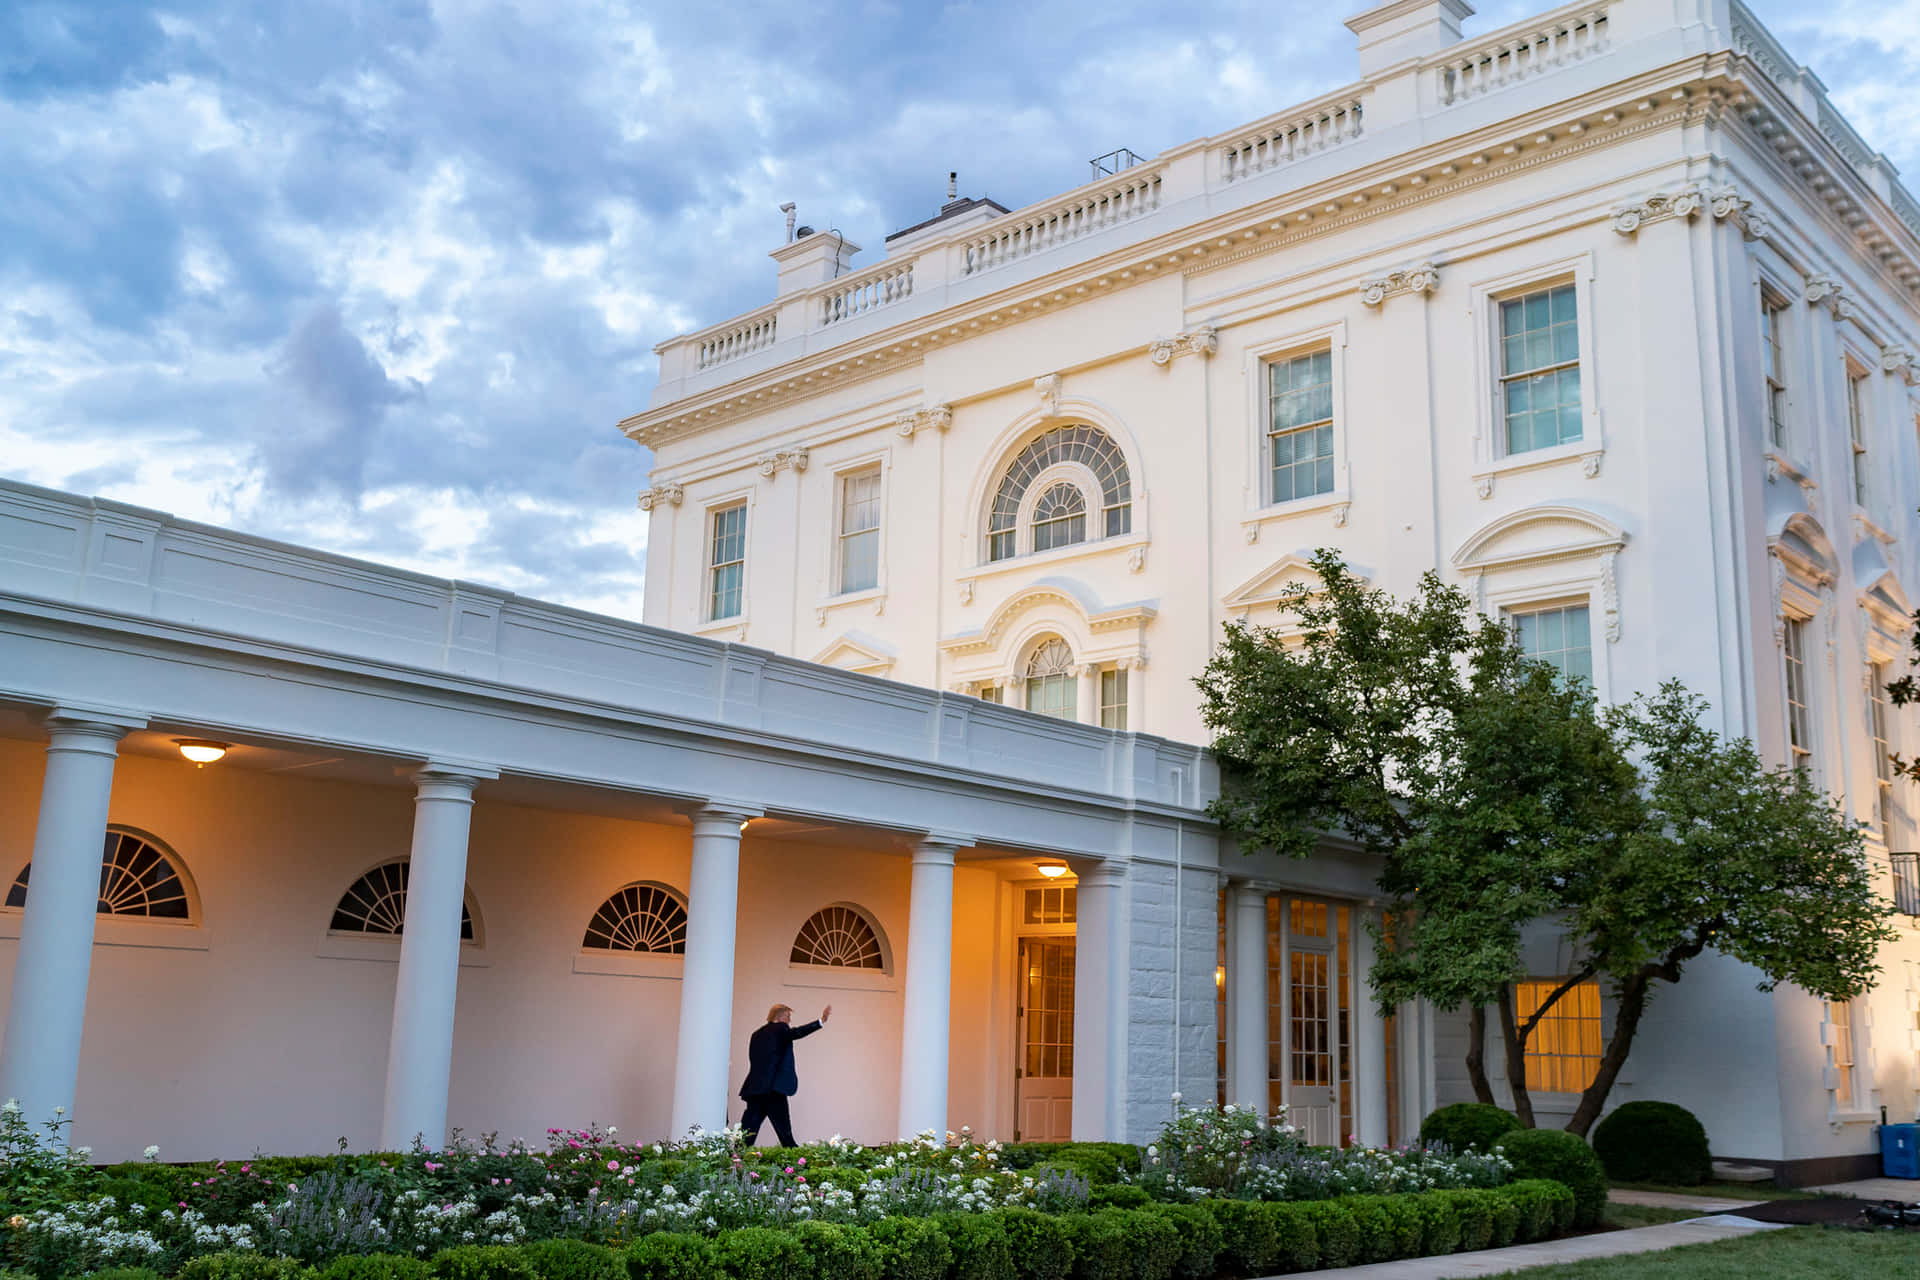 Take a stroll in the White House Rose Garden